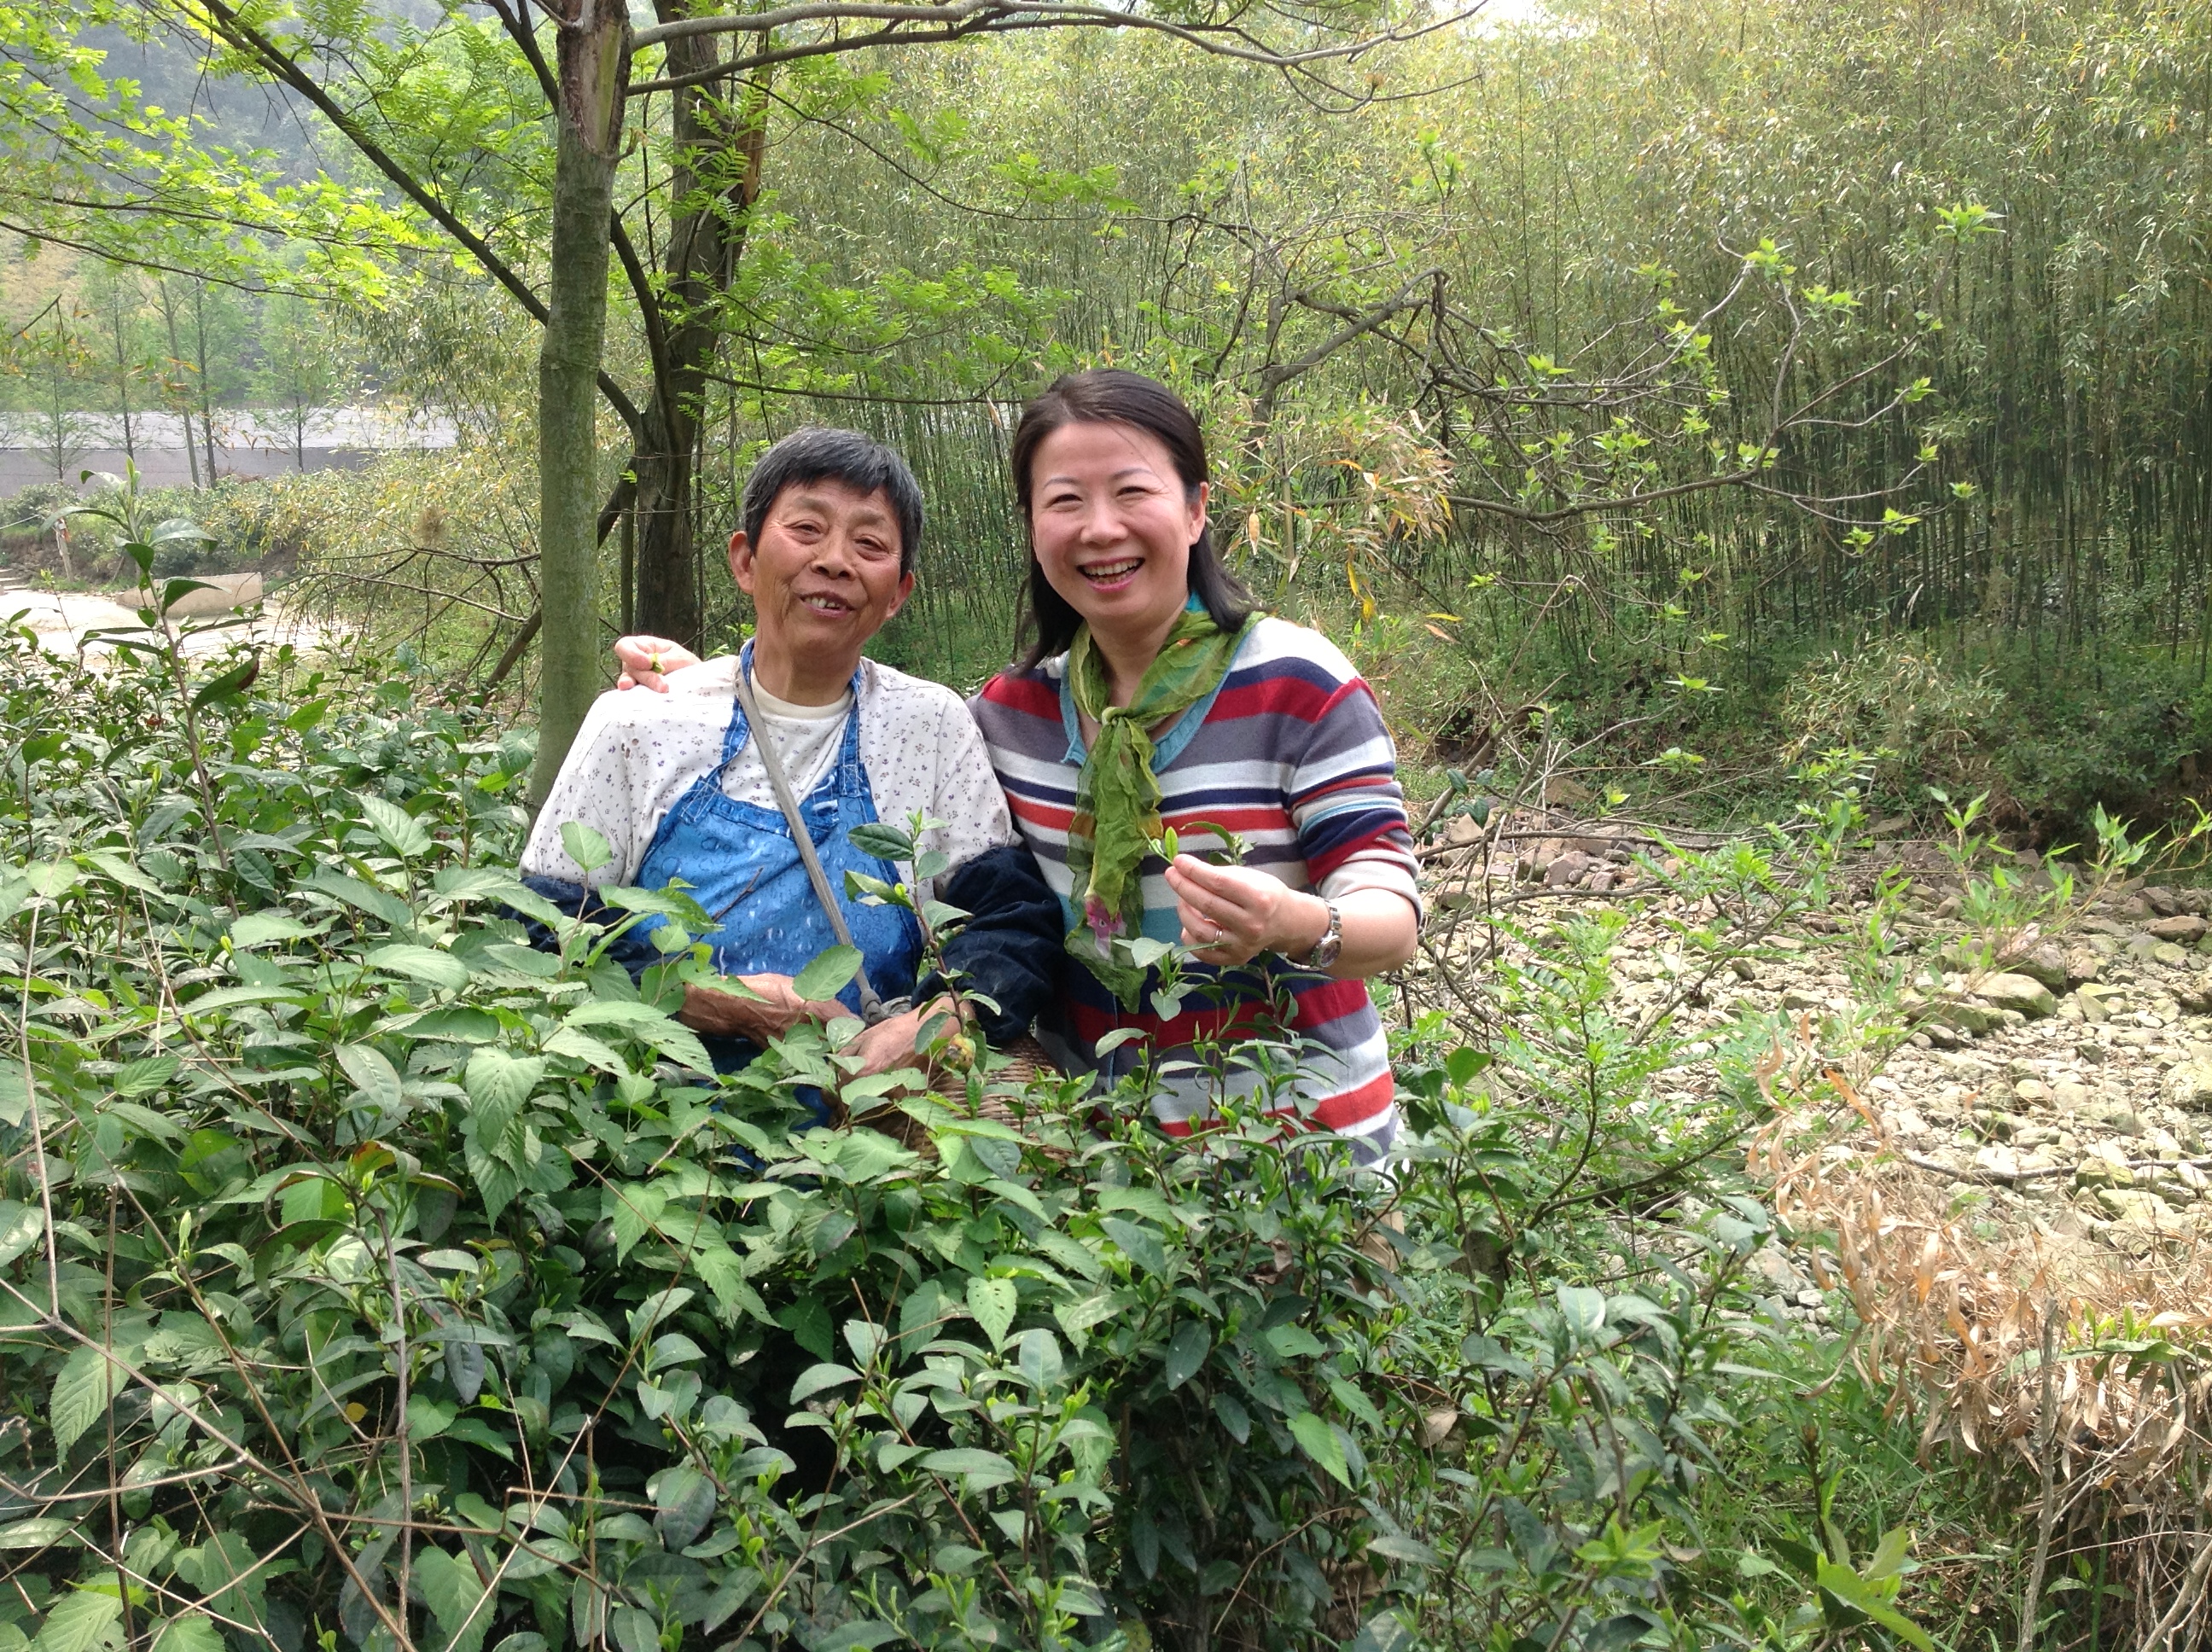 Zhuping and Mrs. Pei Hongfeng together in the tea garden, smiling.